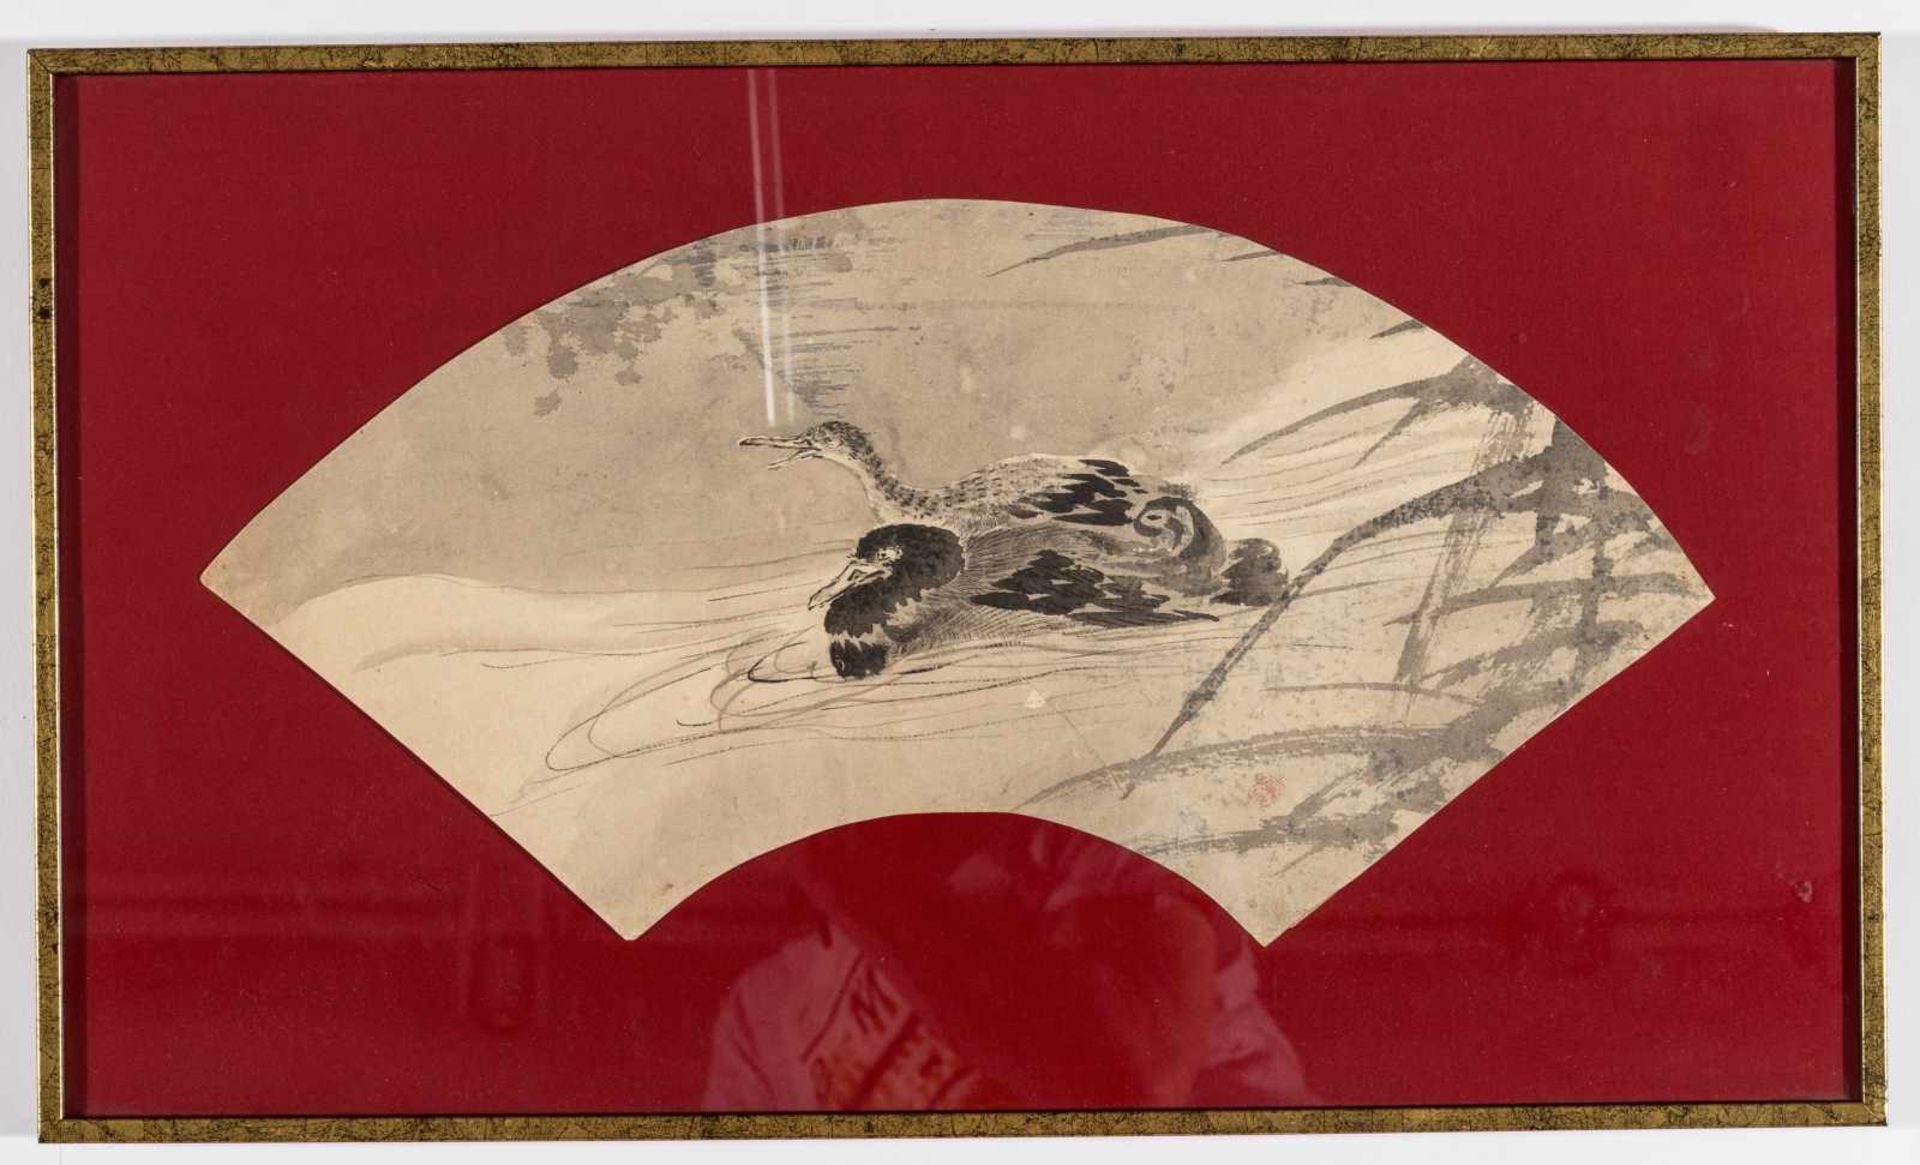 A JAPANESE FAN-SHAPED PAINTING WITH DUCKS – 1900s Ink painting on paper, framedJapan, 1900s Nice